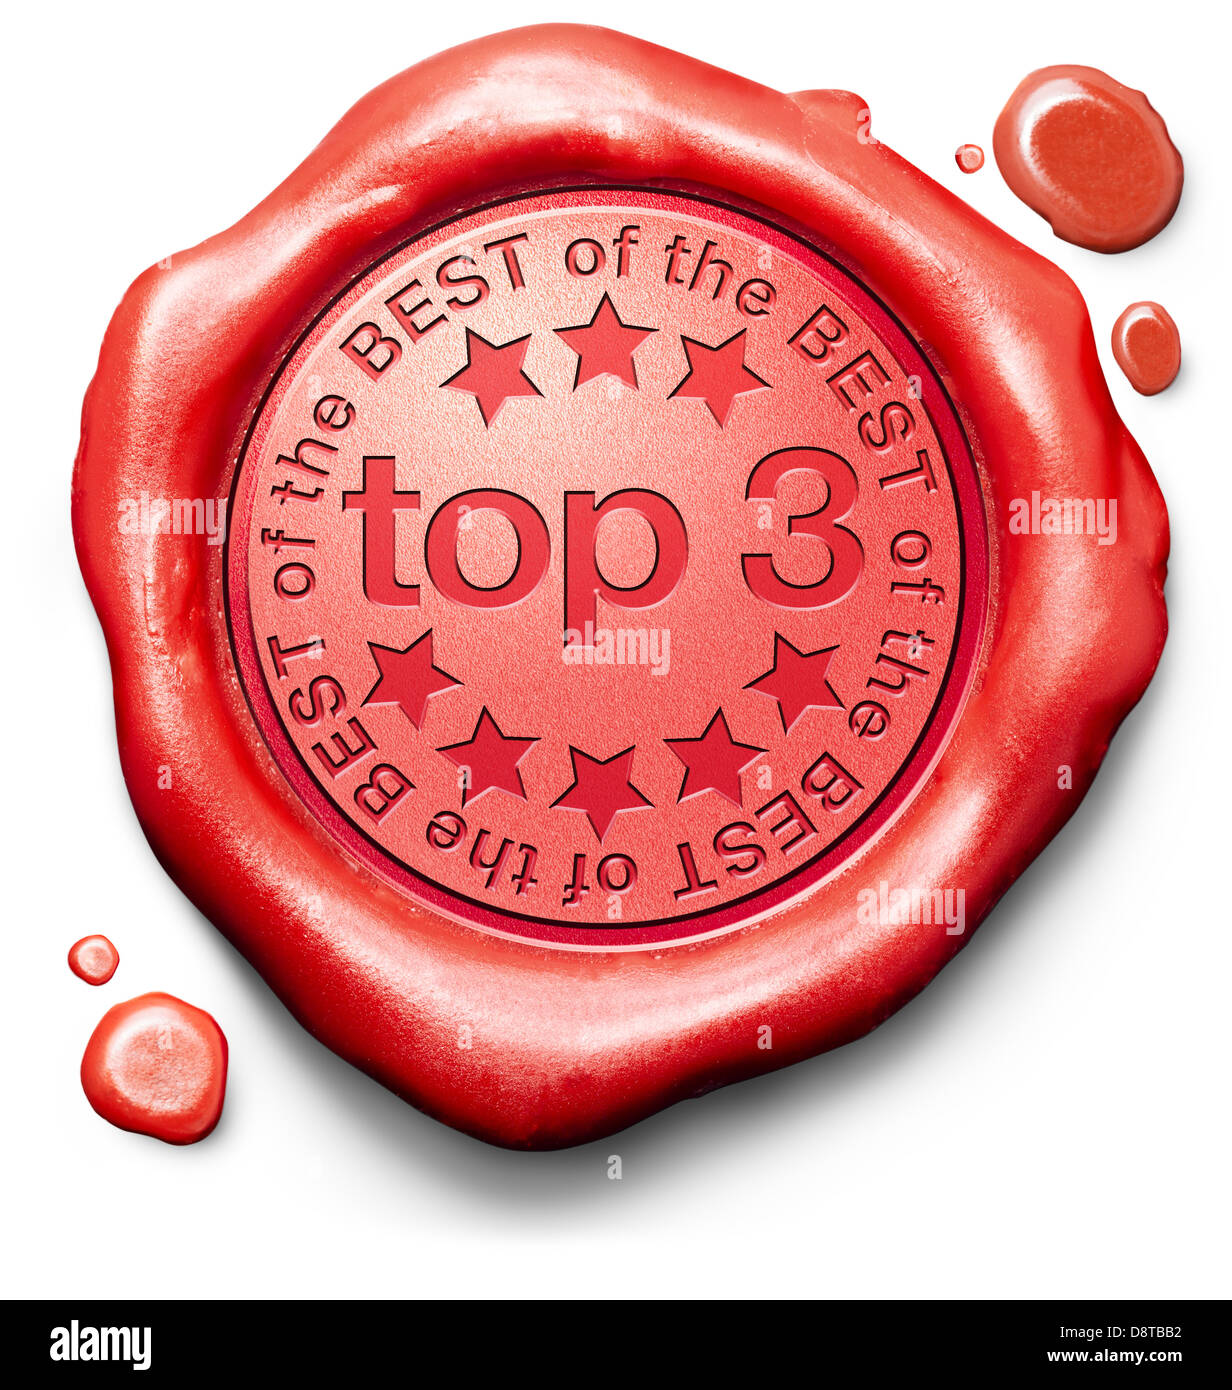 top 3 best bestseller icon red wax seal stamp isolated on white quality label Stock Photo